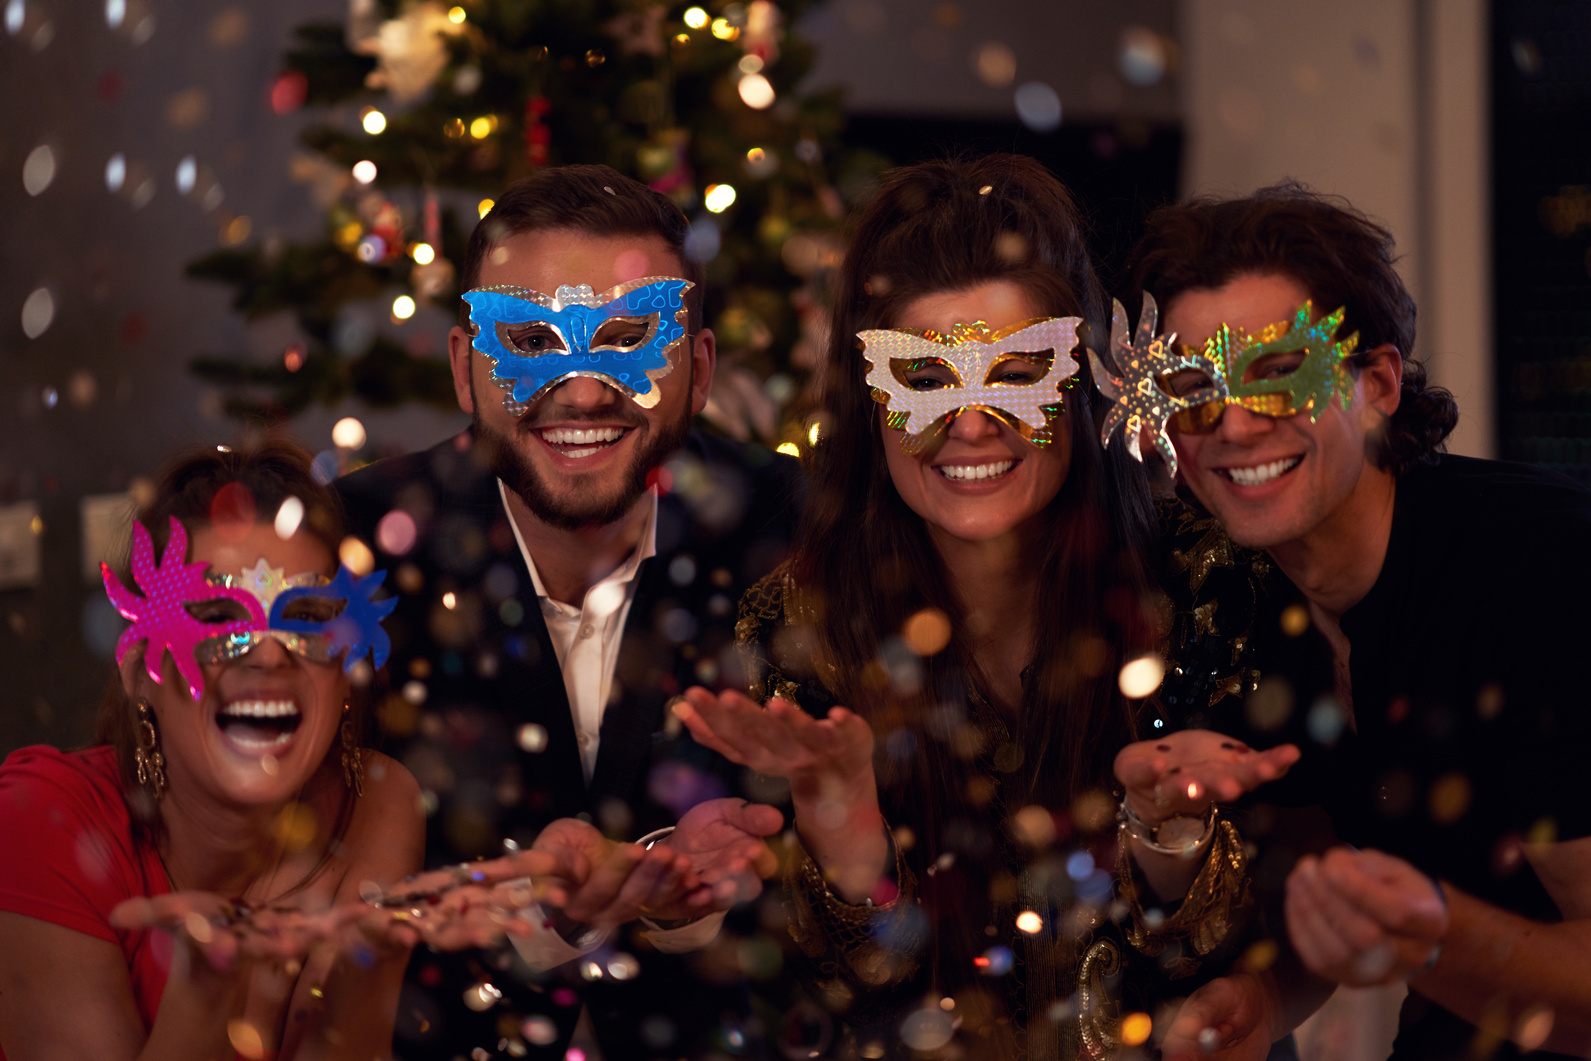 Group of Friends Having Masquerade Party During Holidays 